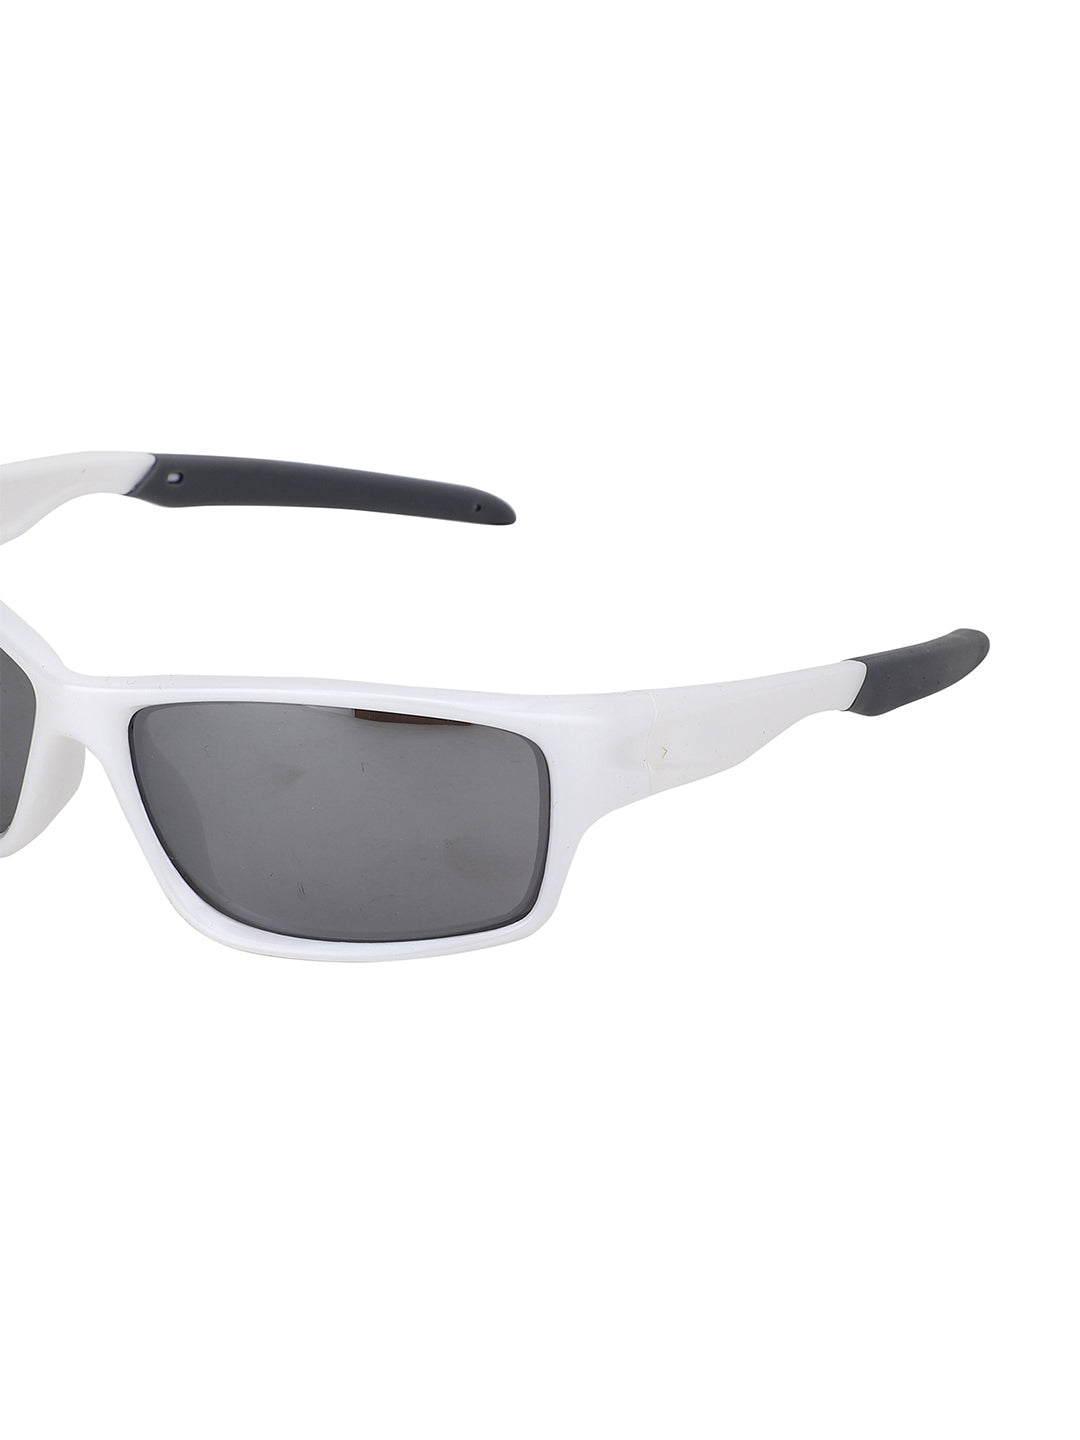 Carlton London Mirrored Lens  White Rectangle Sunglasses With Uv Protected Lens For Boy